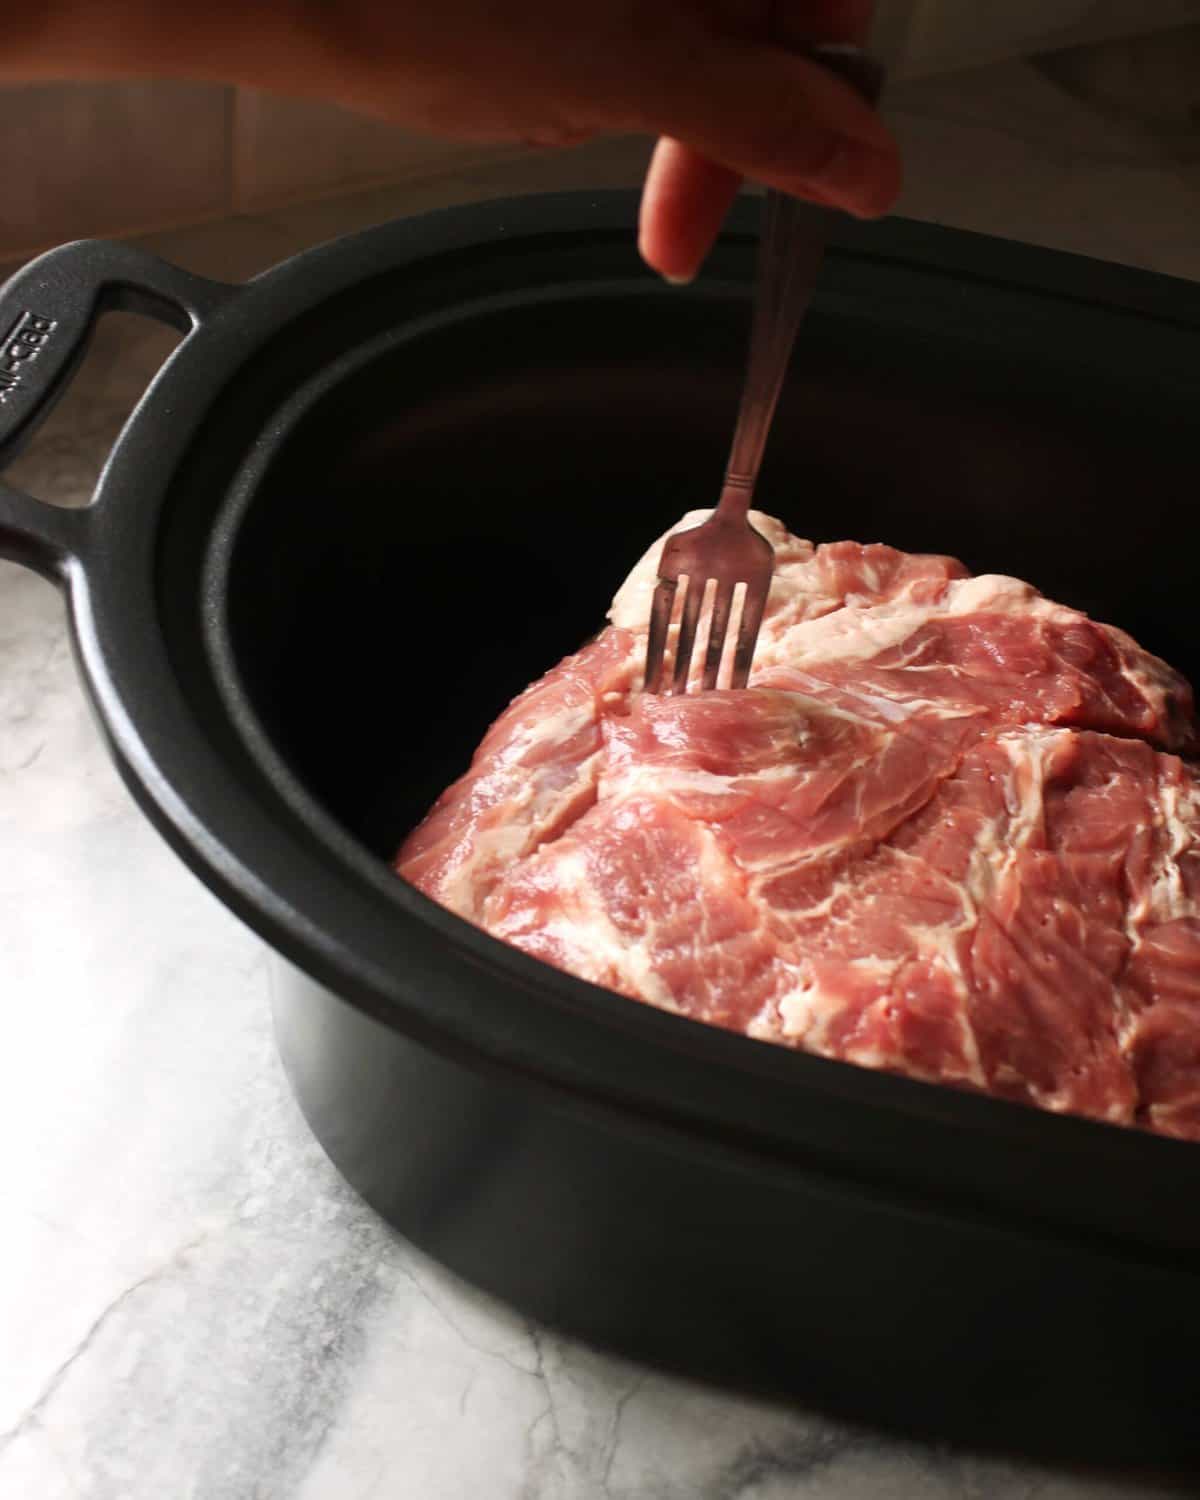 Pork being pierced with a fork in a slow cooker for Kalua Pork